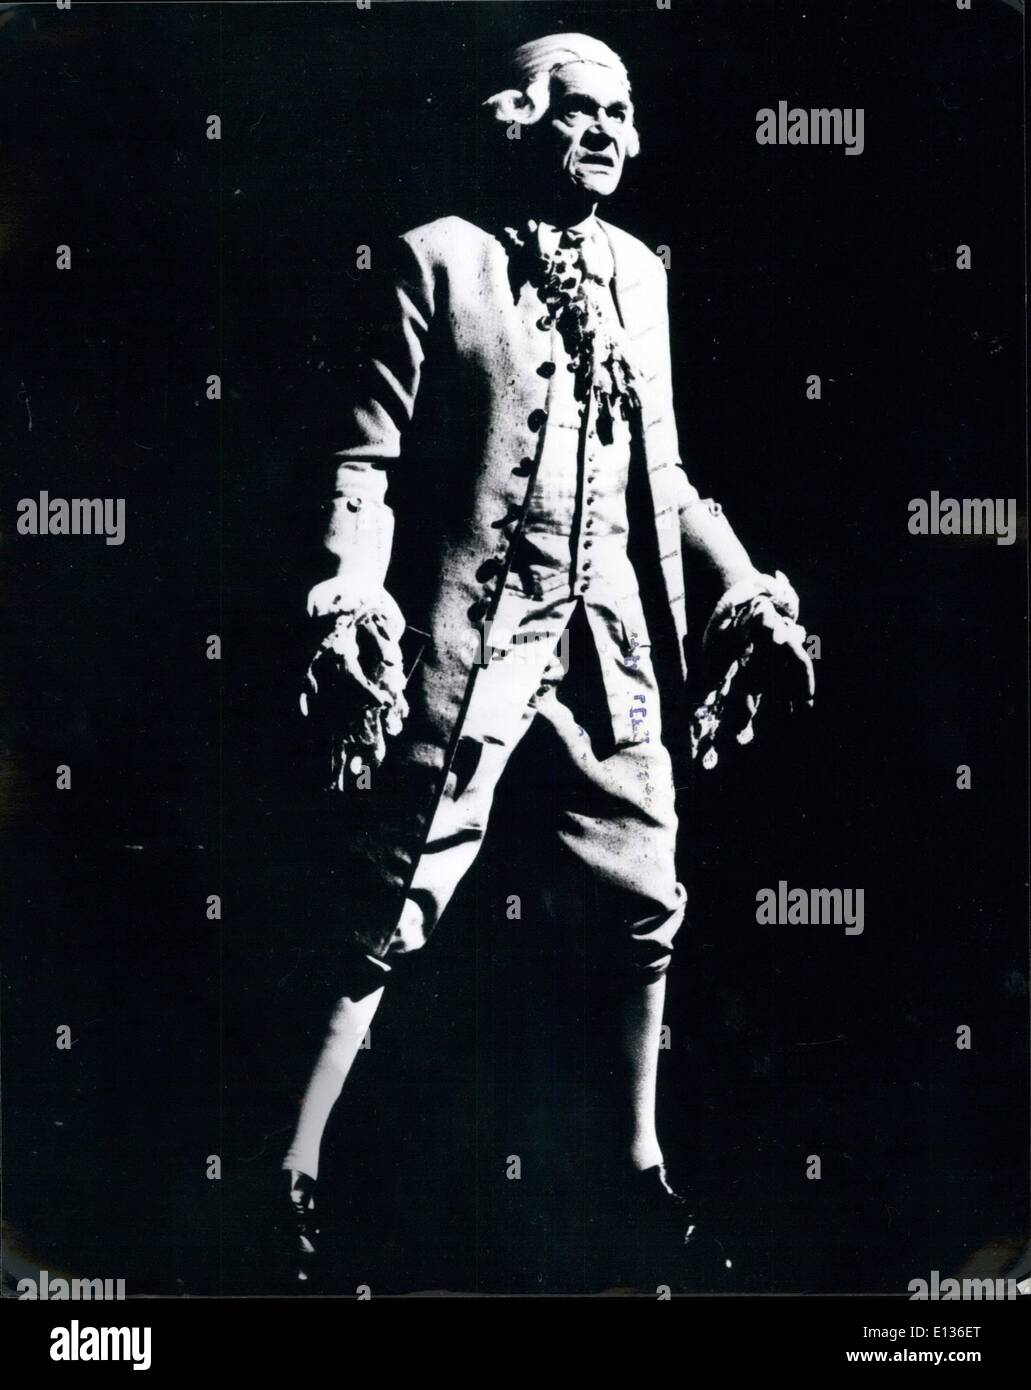 Feb. 28, 2012 - January 1980 Paul Scofield in Amadeus at the Olivier Theatre. The National Theatre production of Peter Shaffer's new play Amadeus at the Olivier Theatre, South Bank, London. Directed by Peter Hall with design and lighting by John Bury, music by Mozart and Salieri. Photo Shows: Paul Scofield who takes the part of Antonio Salieri in the play. Stock Photo